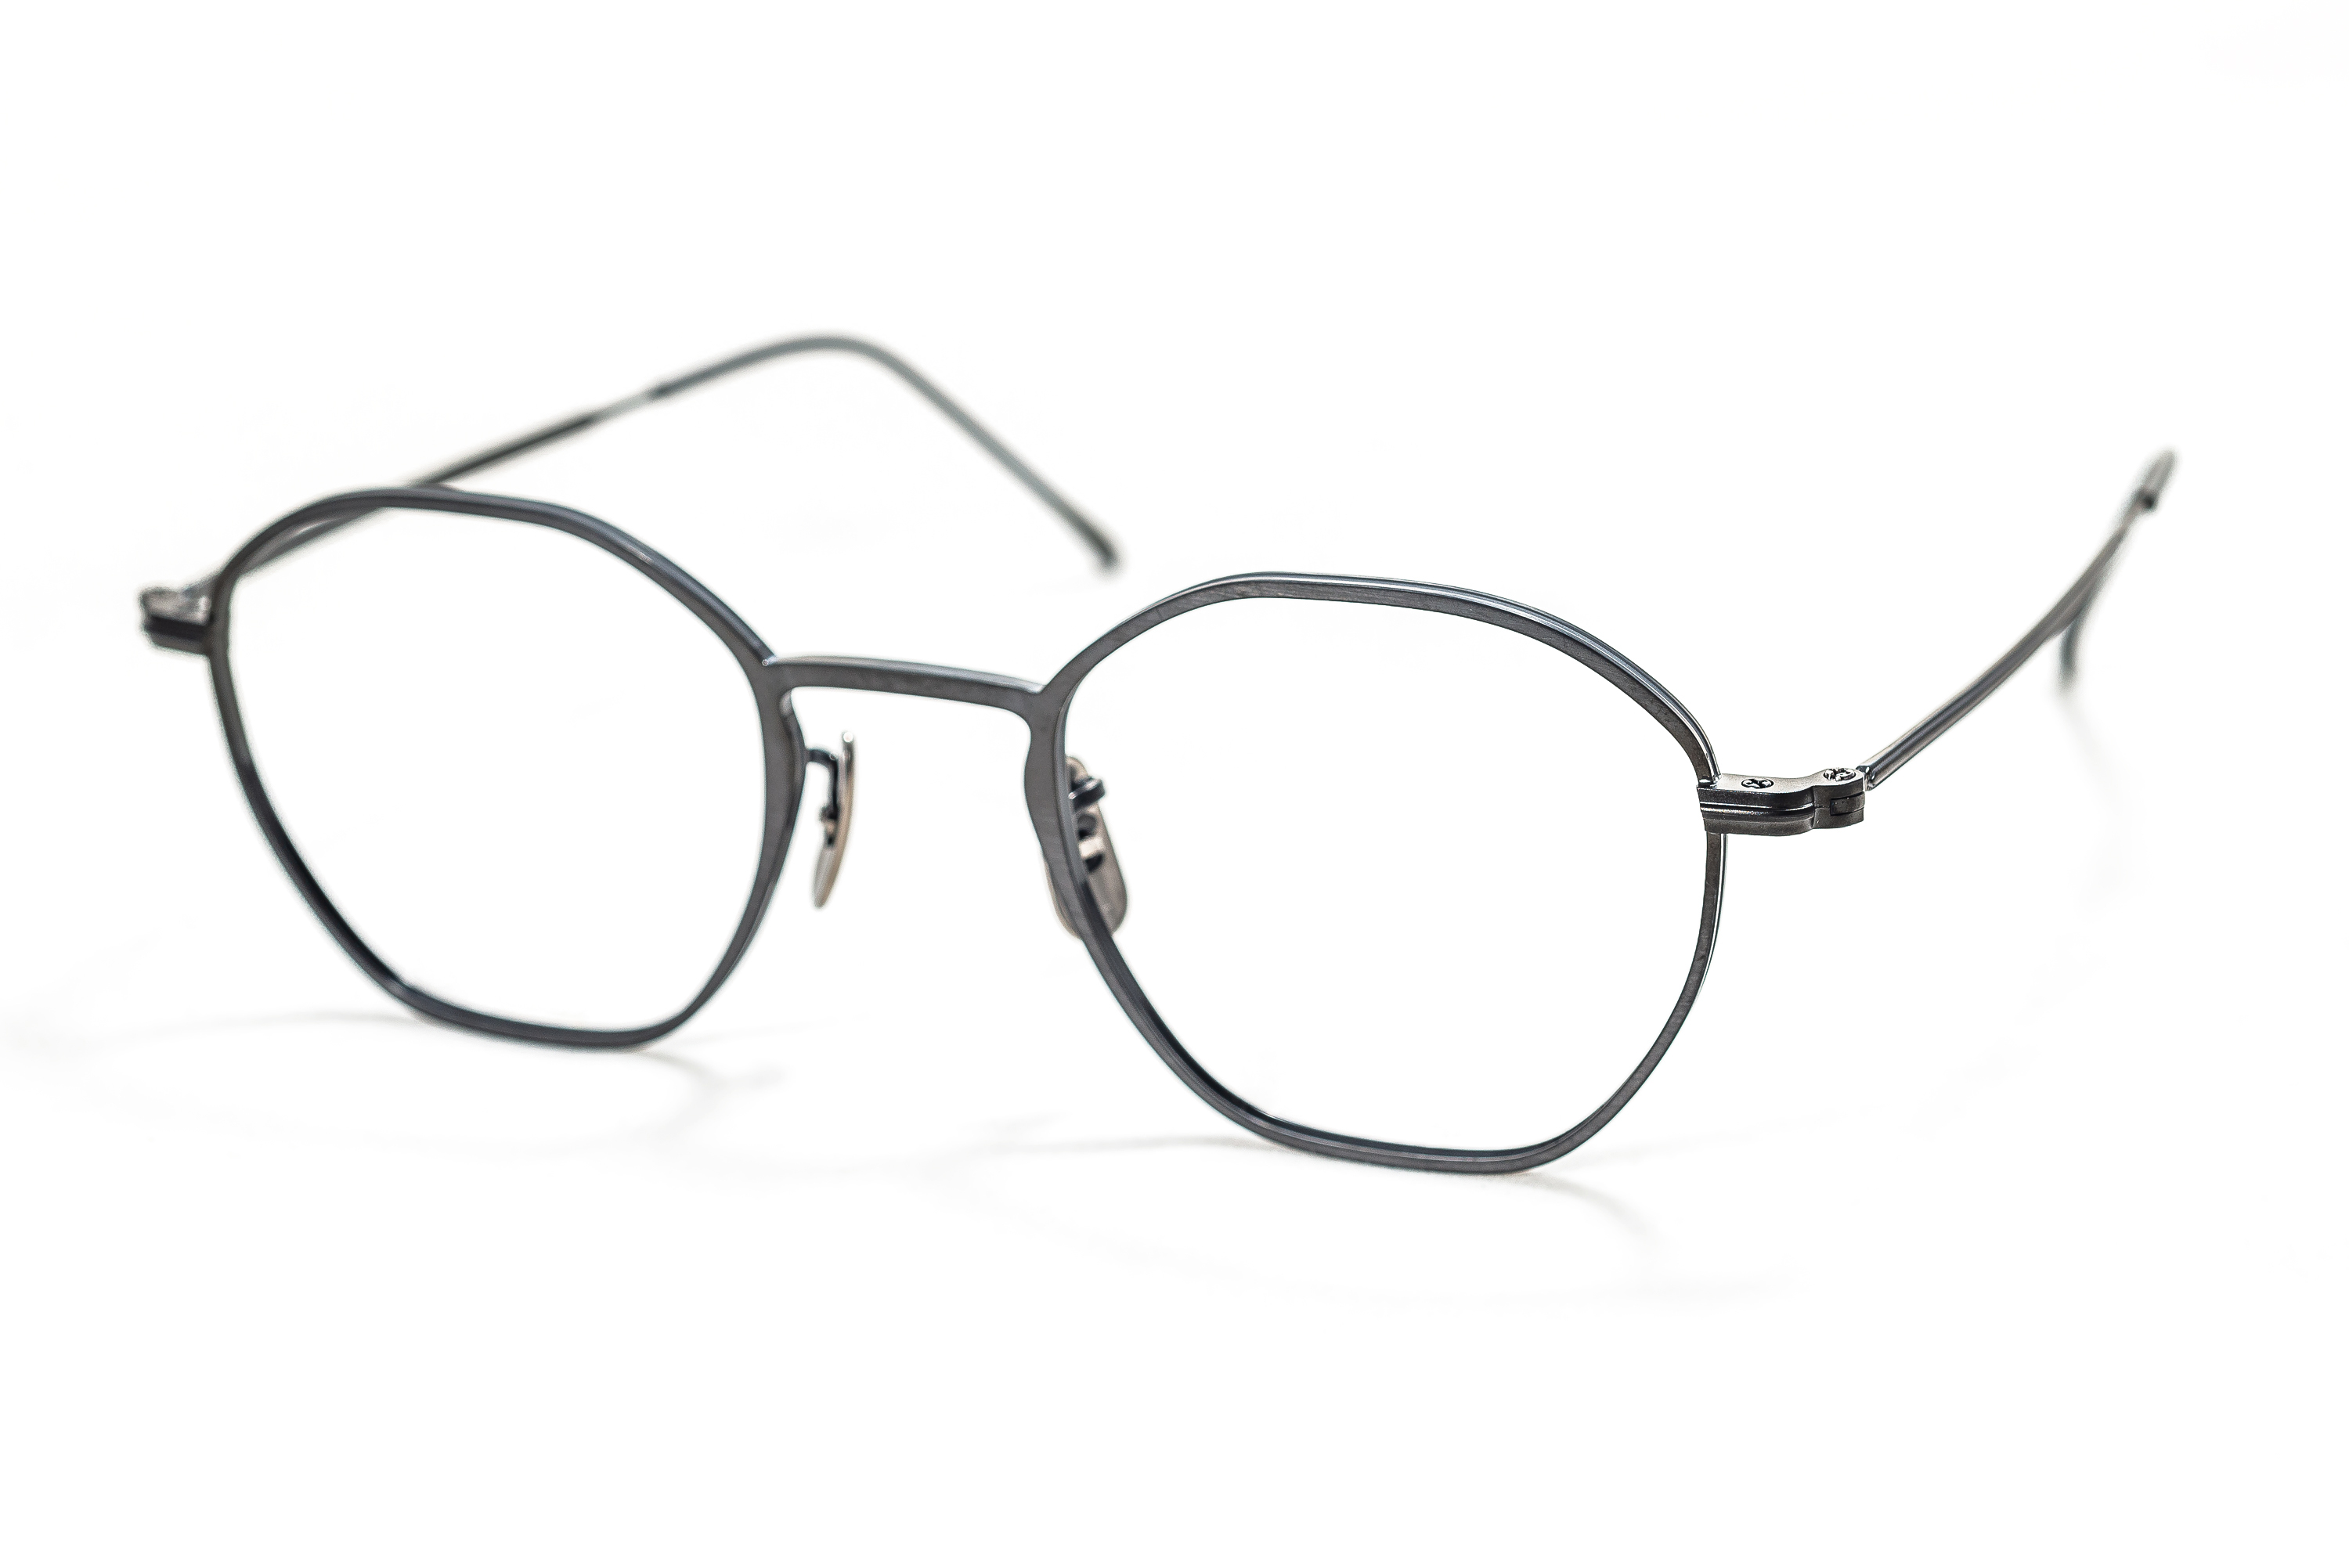 H-fusion - HF-510-COL-01- The New Black Optical